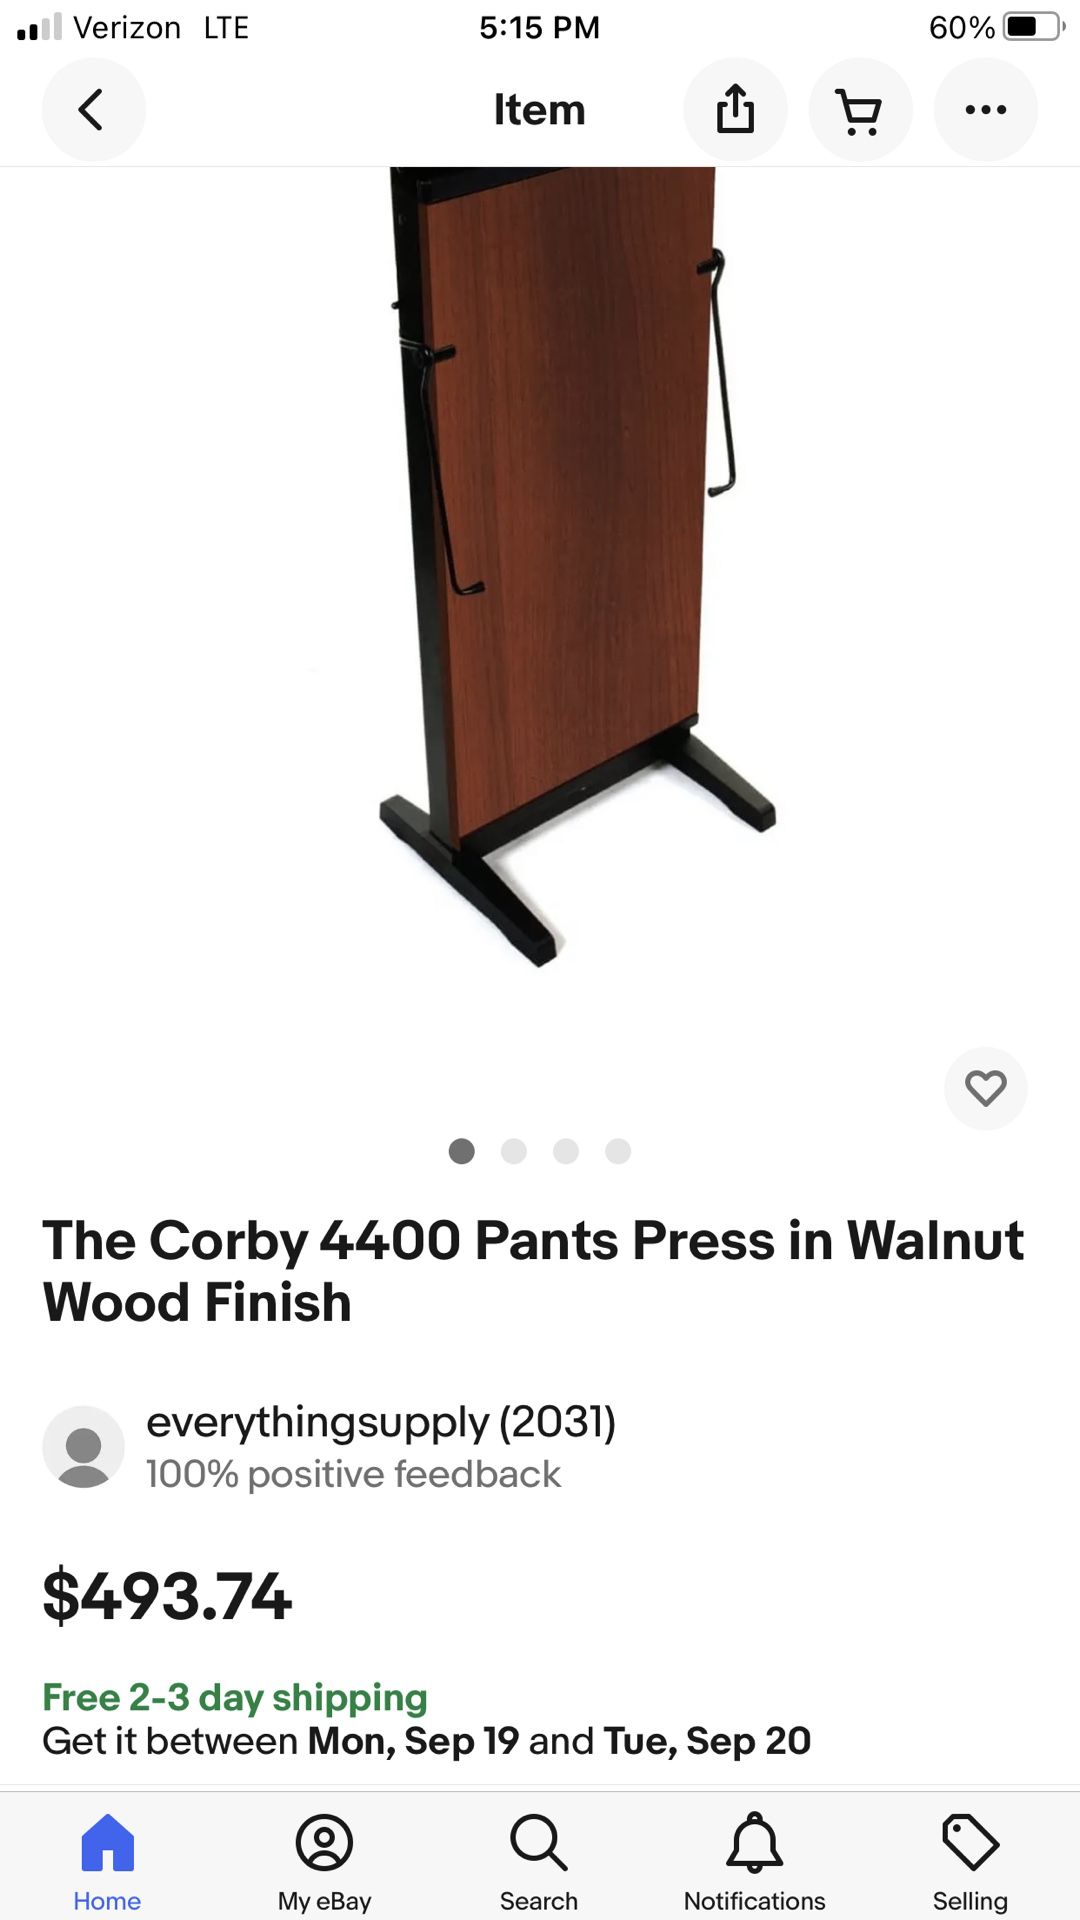 CORBY STATESMEN ELECTRIC TROUSER /PANTS PRESSER for Sale in Howell